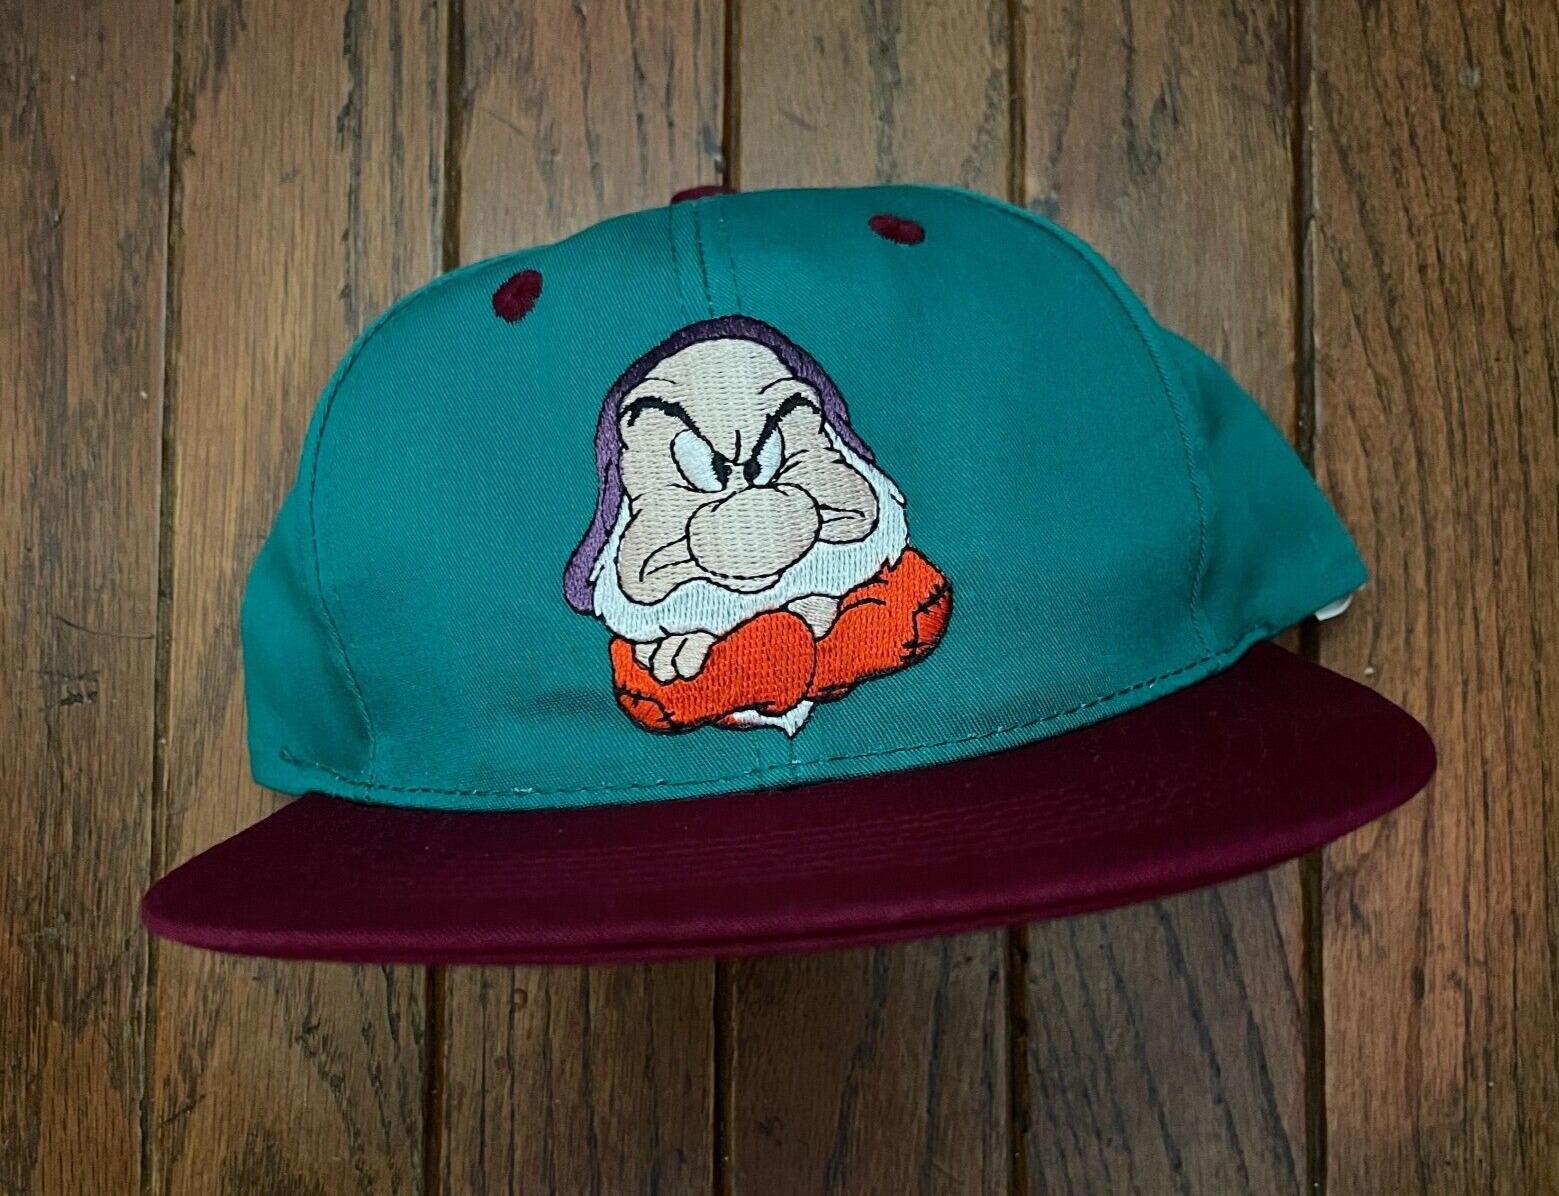 Vintage Disney Youth Size Grumpy Hat - Made for the Release of Snow White